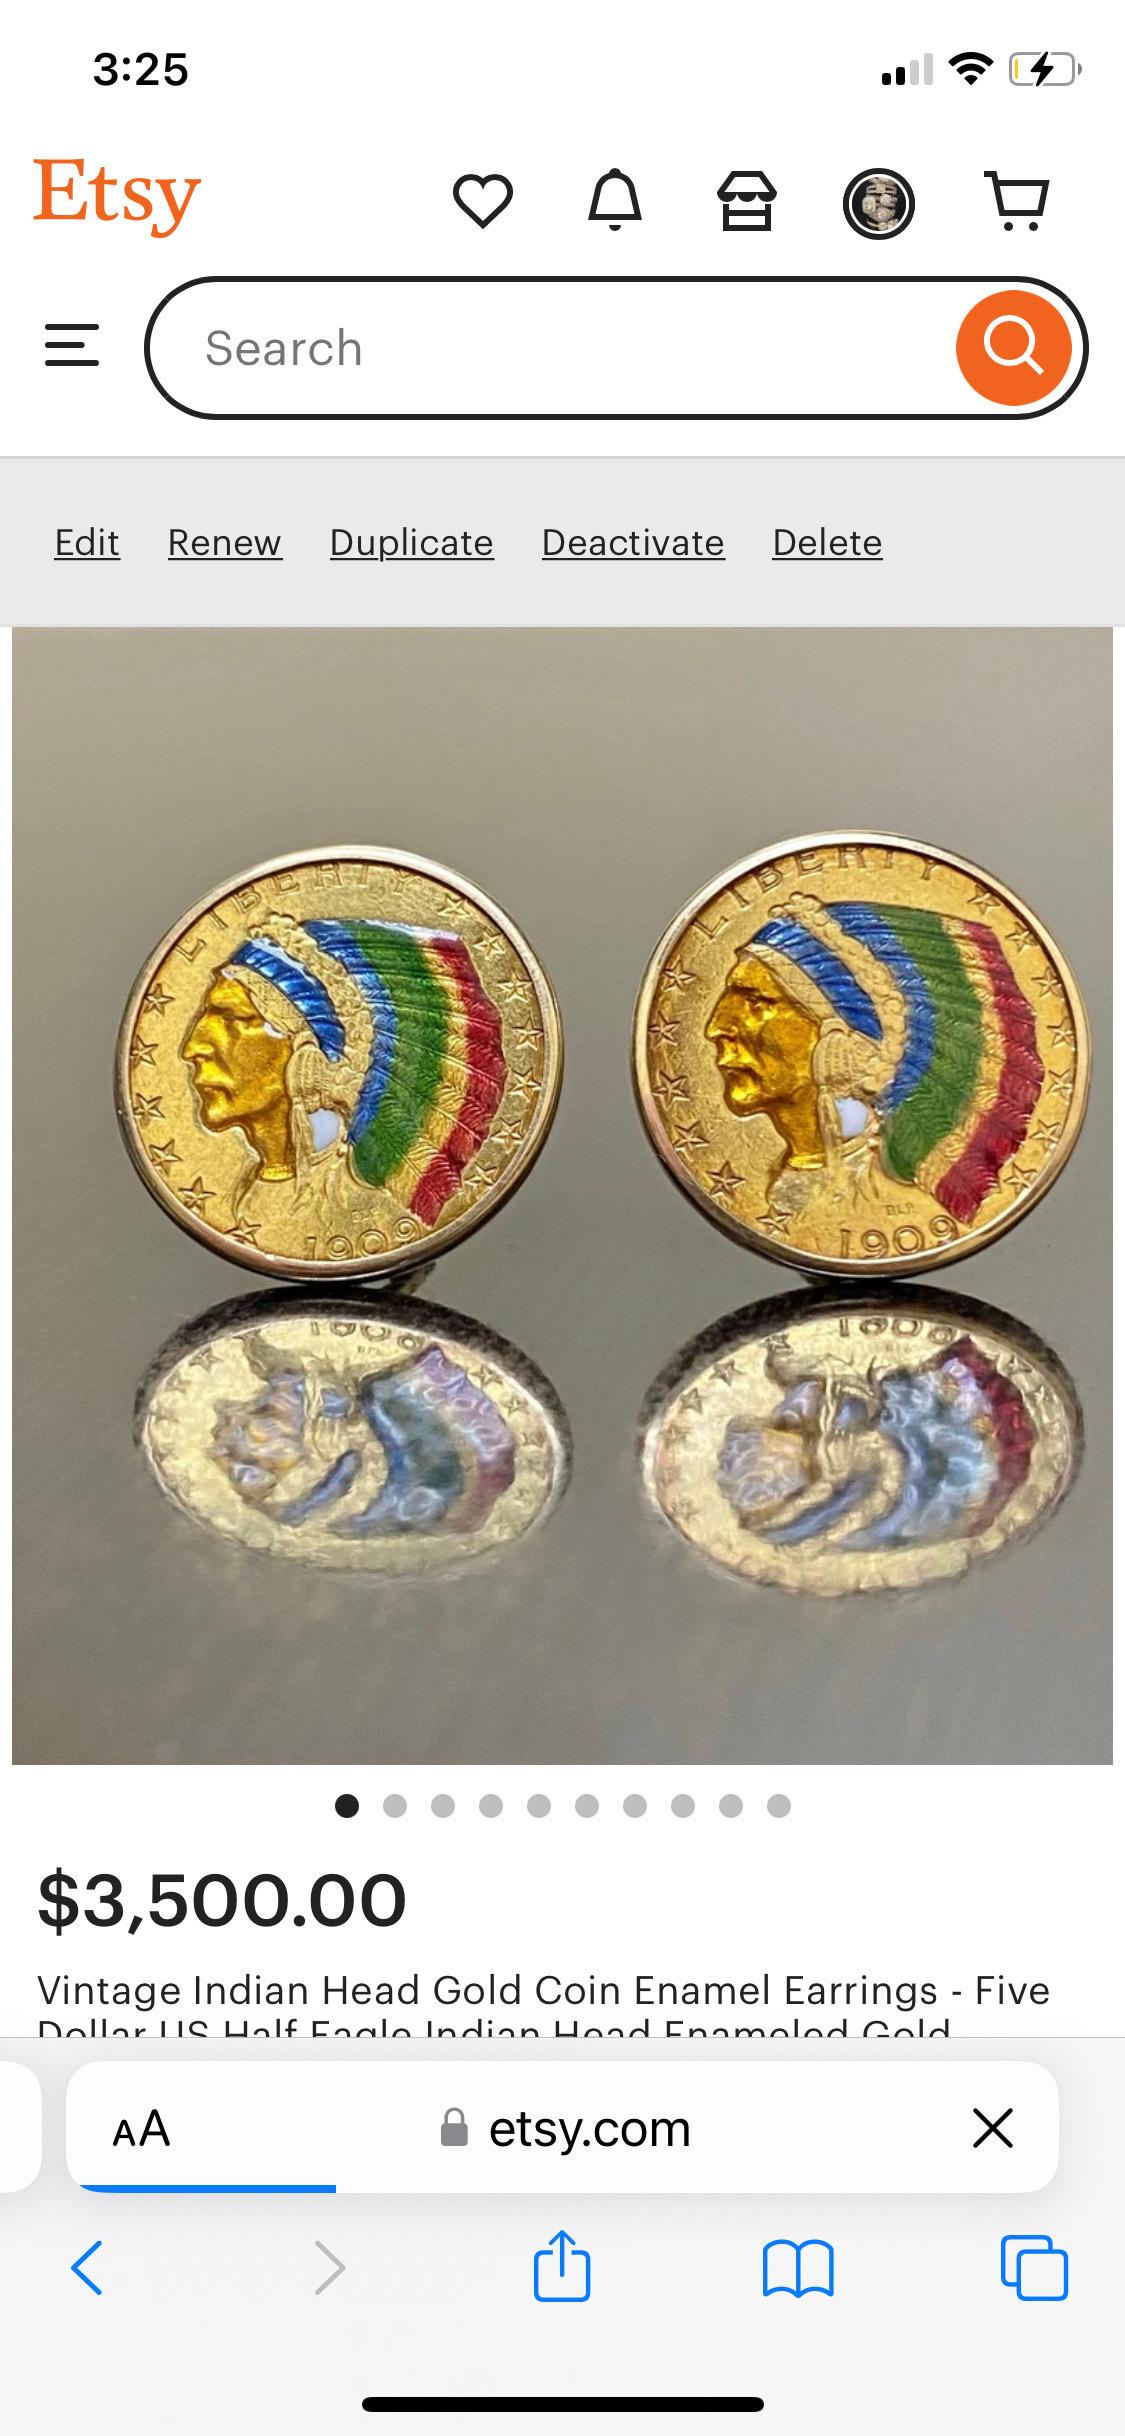 DeKara Designs Vintage Collection

Metal- 90% Gold, 14K Yellow Gold, .583. 21.4 Grams.

Authentic Vintage United Sates Half Dollar Five Dollar Indian Head Coin Colored Baked Enamel Earrings. These earrings are in amazing condition. The earrings are